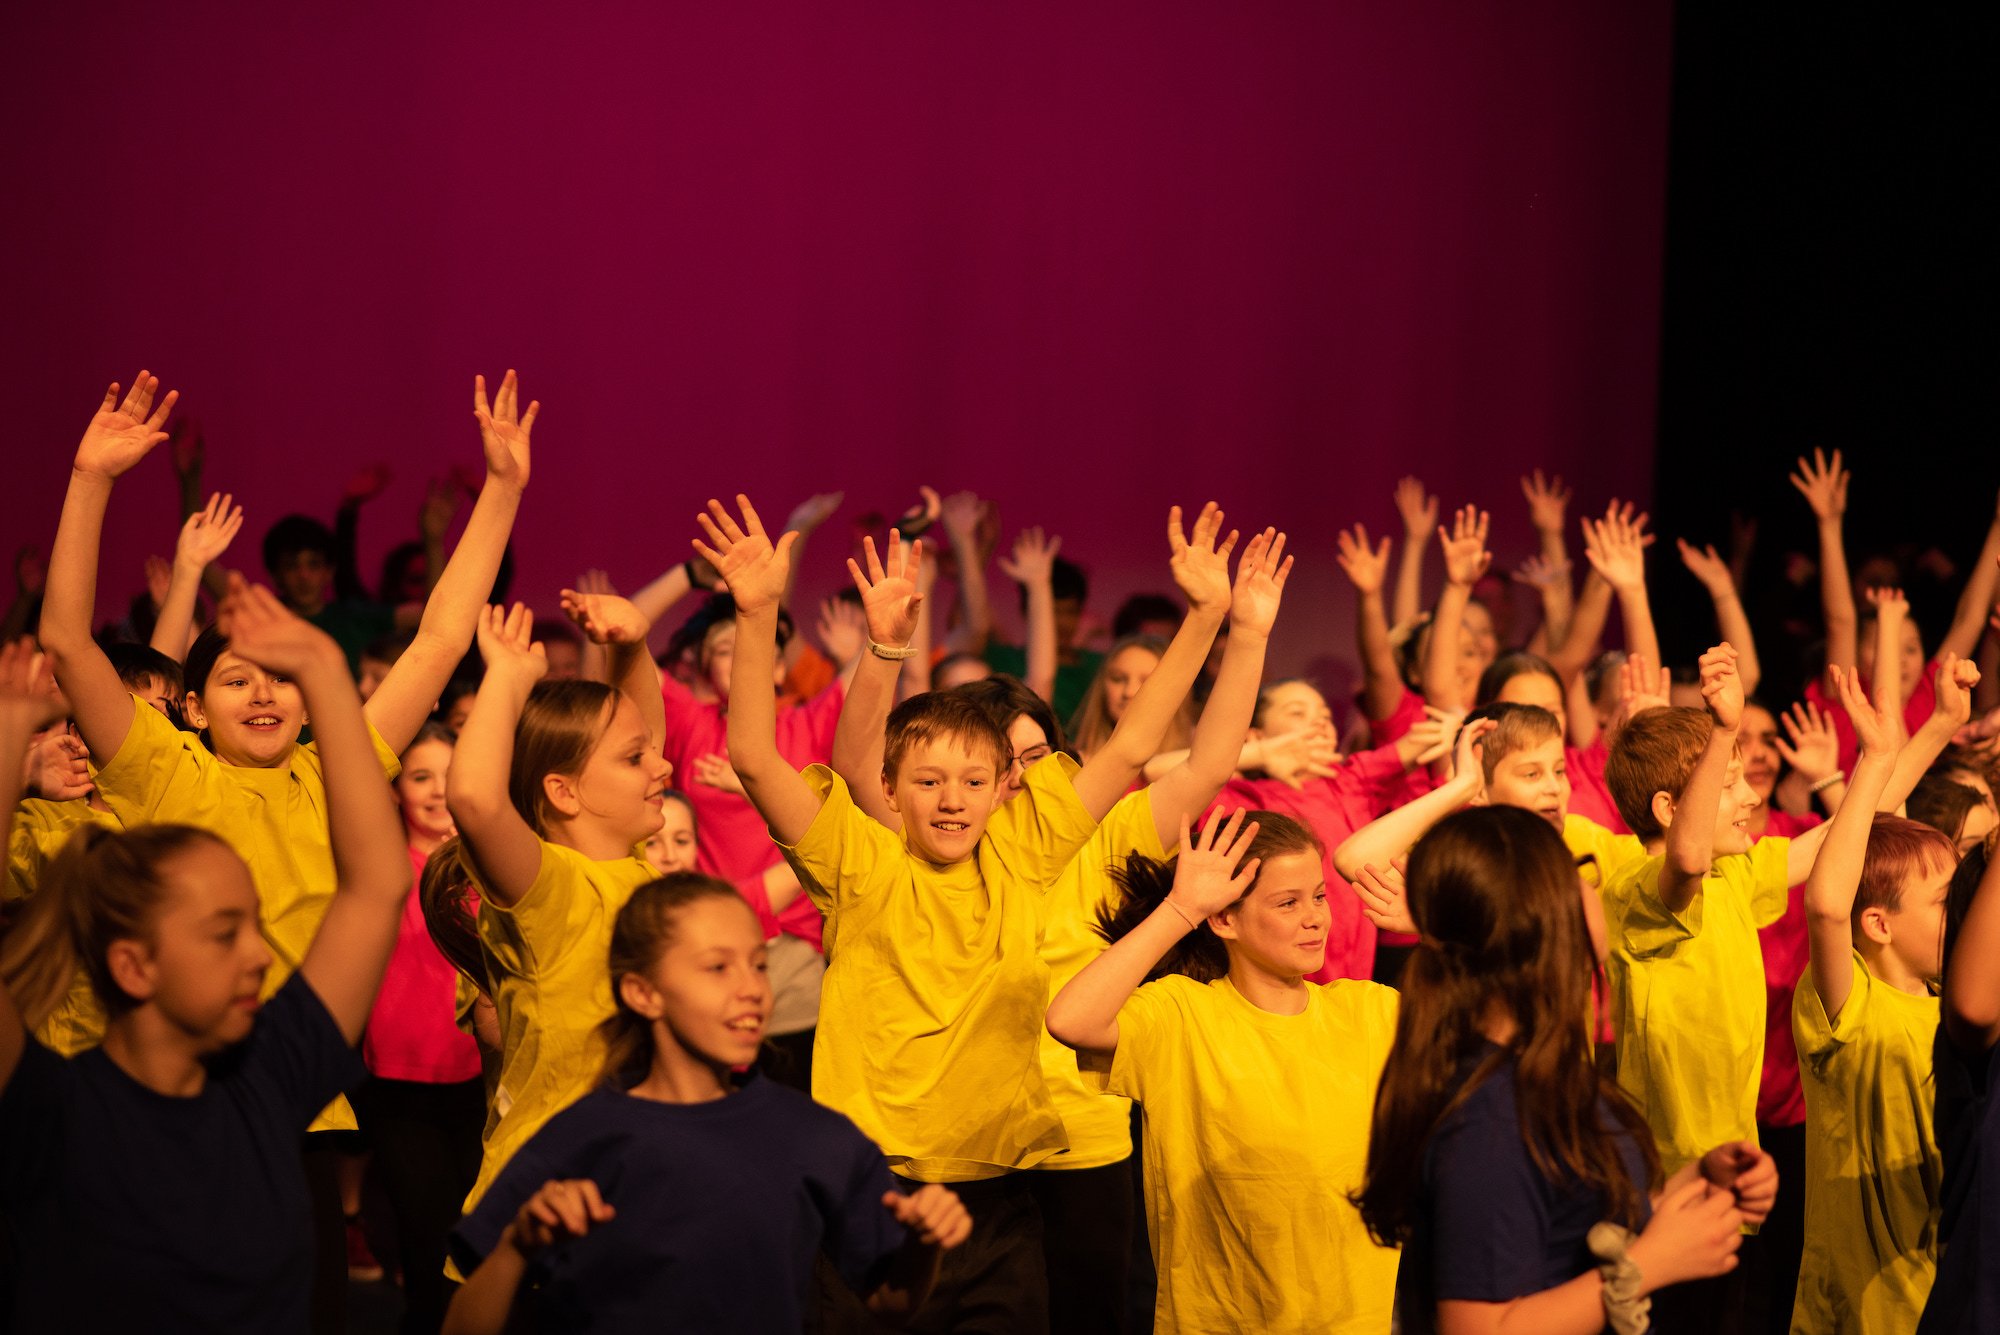  dozens of students dancing on stage joyfully arms raised  